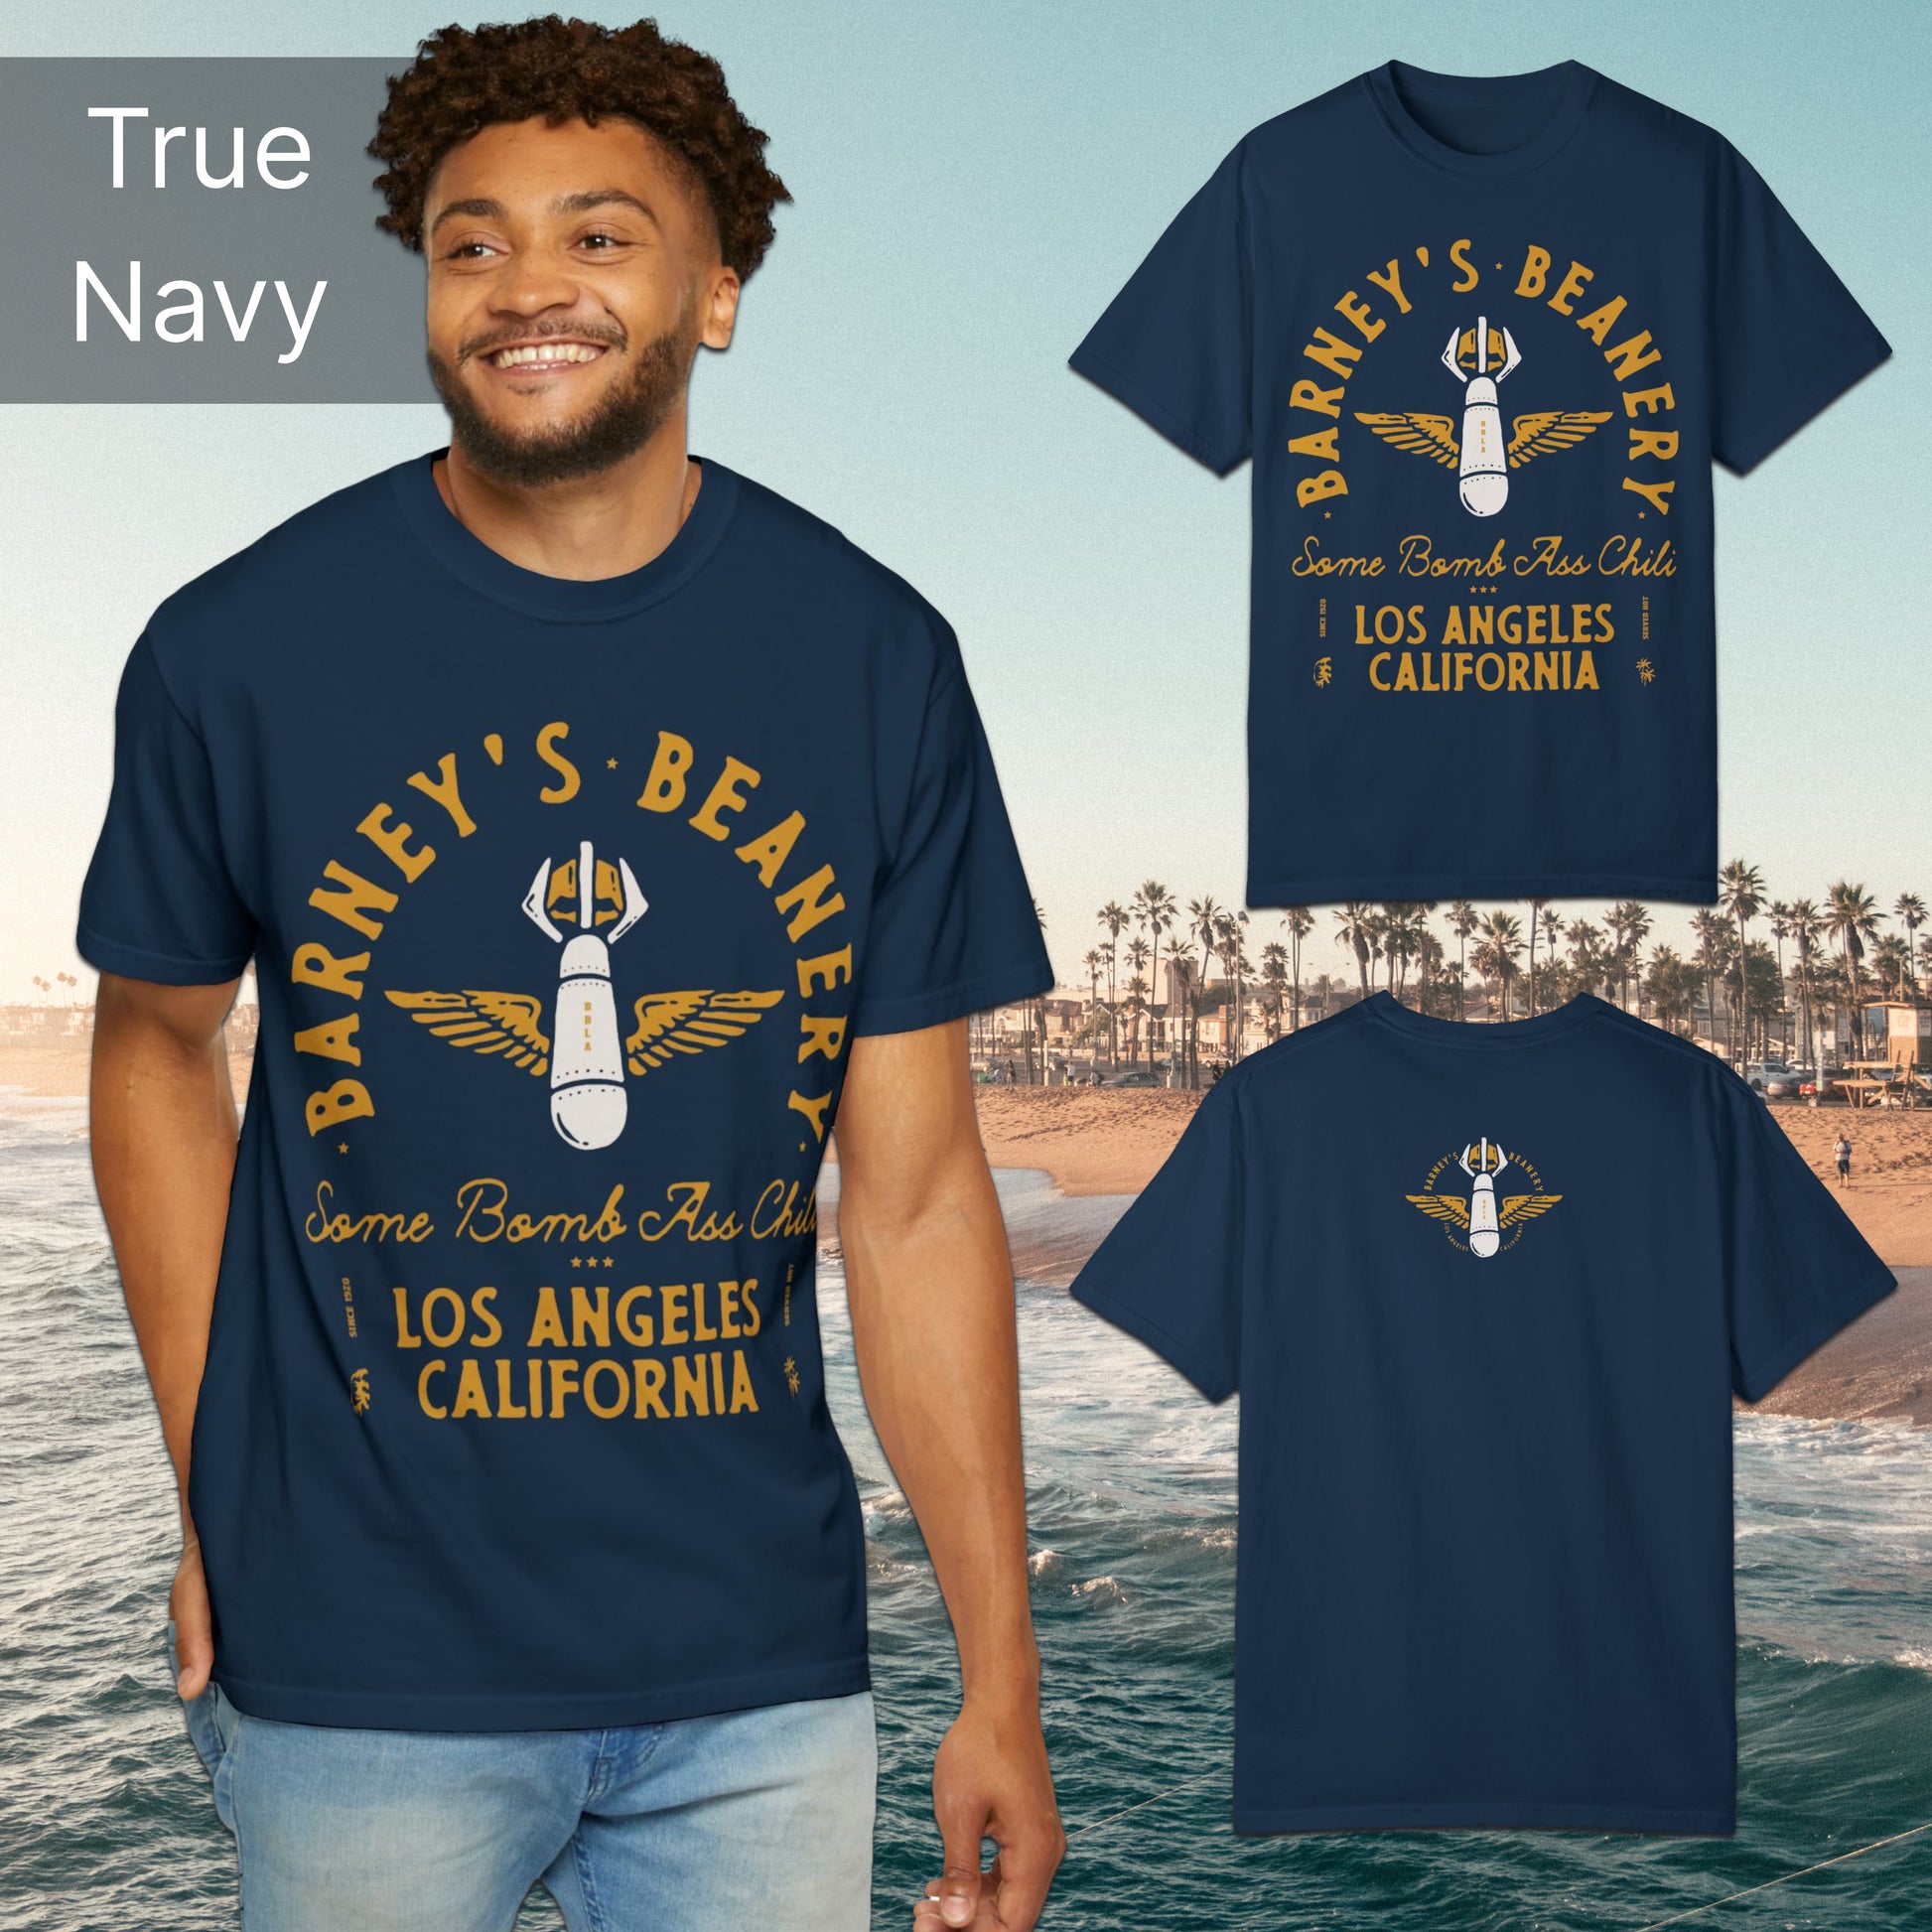 Some Bomb Ass Chili | BARNEY'S BEANERY - Men's Graphic Tee | True Navy Comfort Colors 1717 T-Shirt - All Graphics On Front And Back Flat Lay View